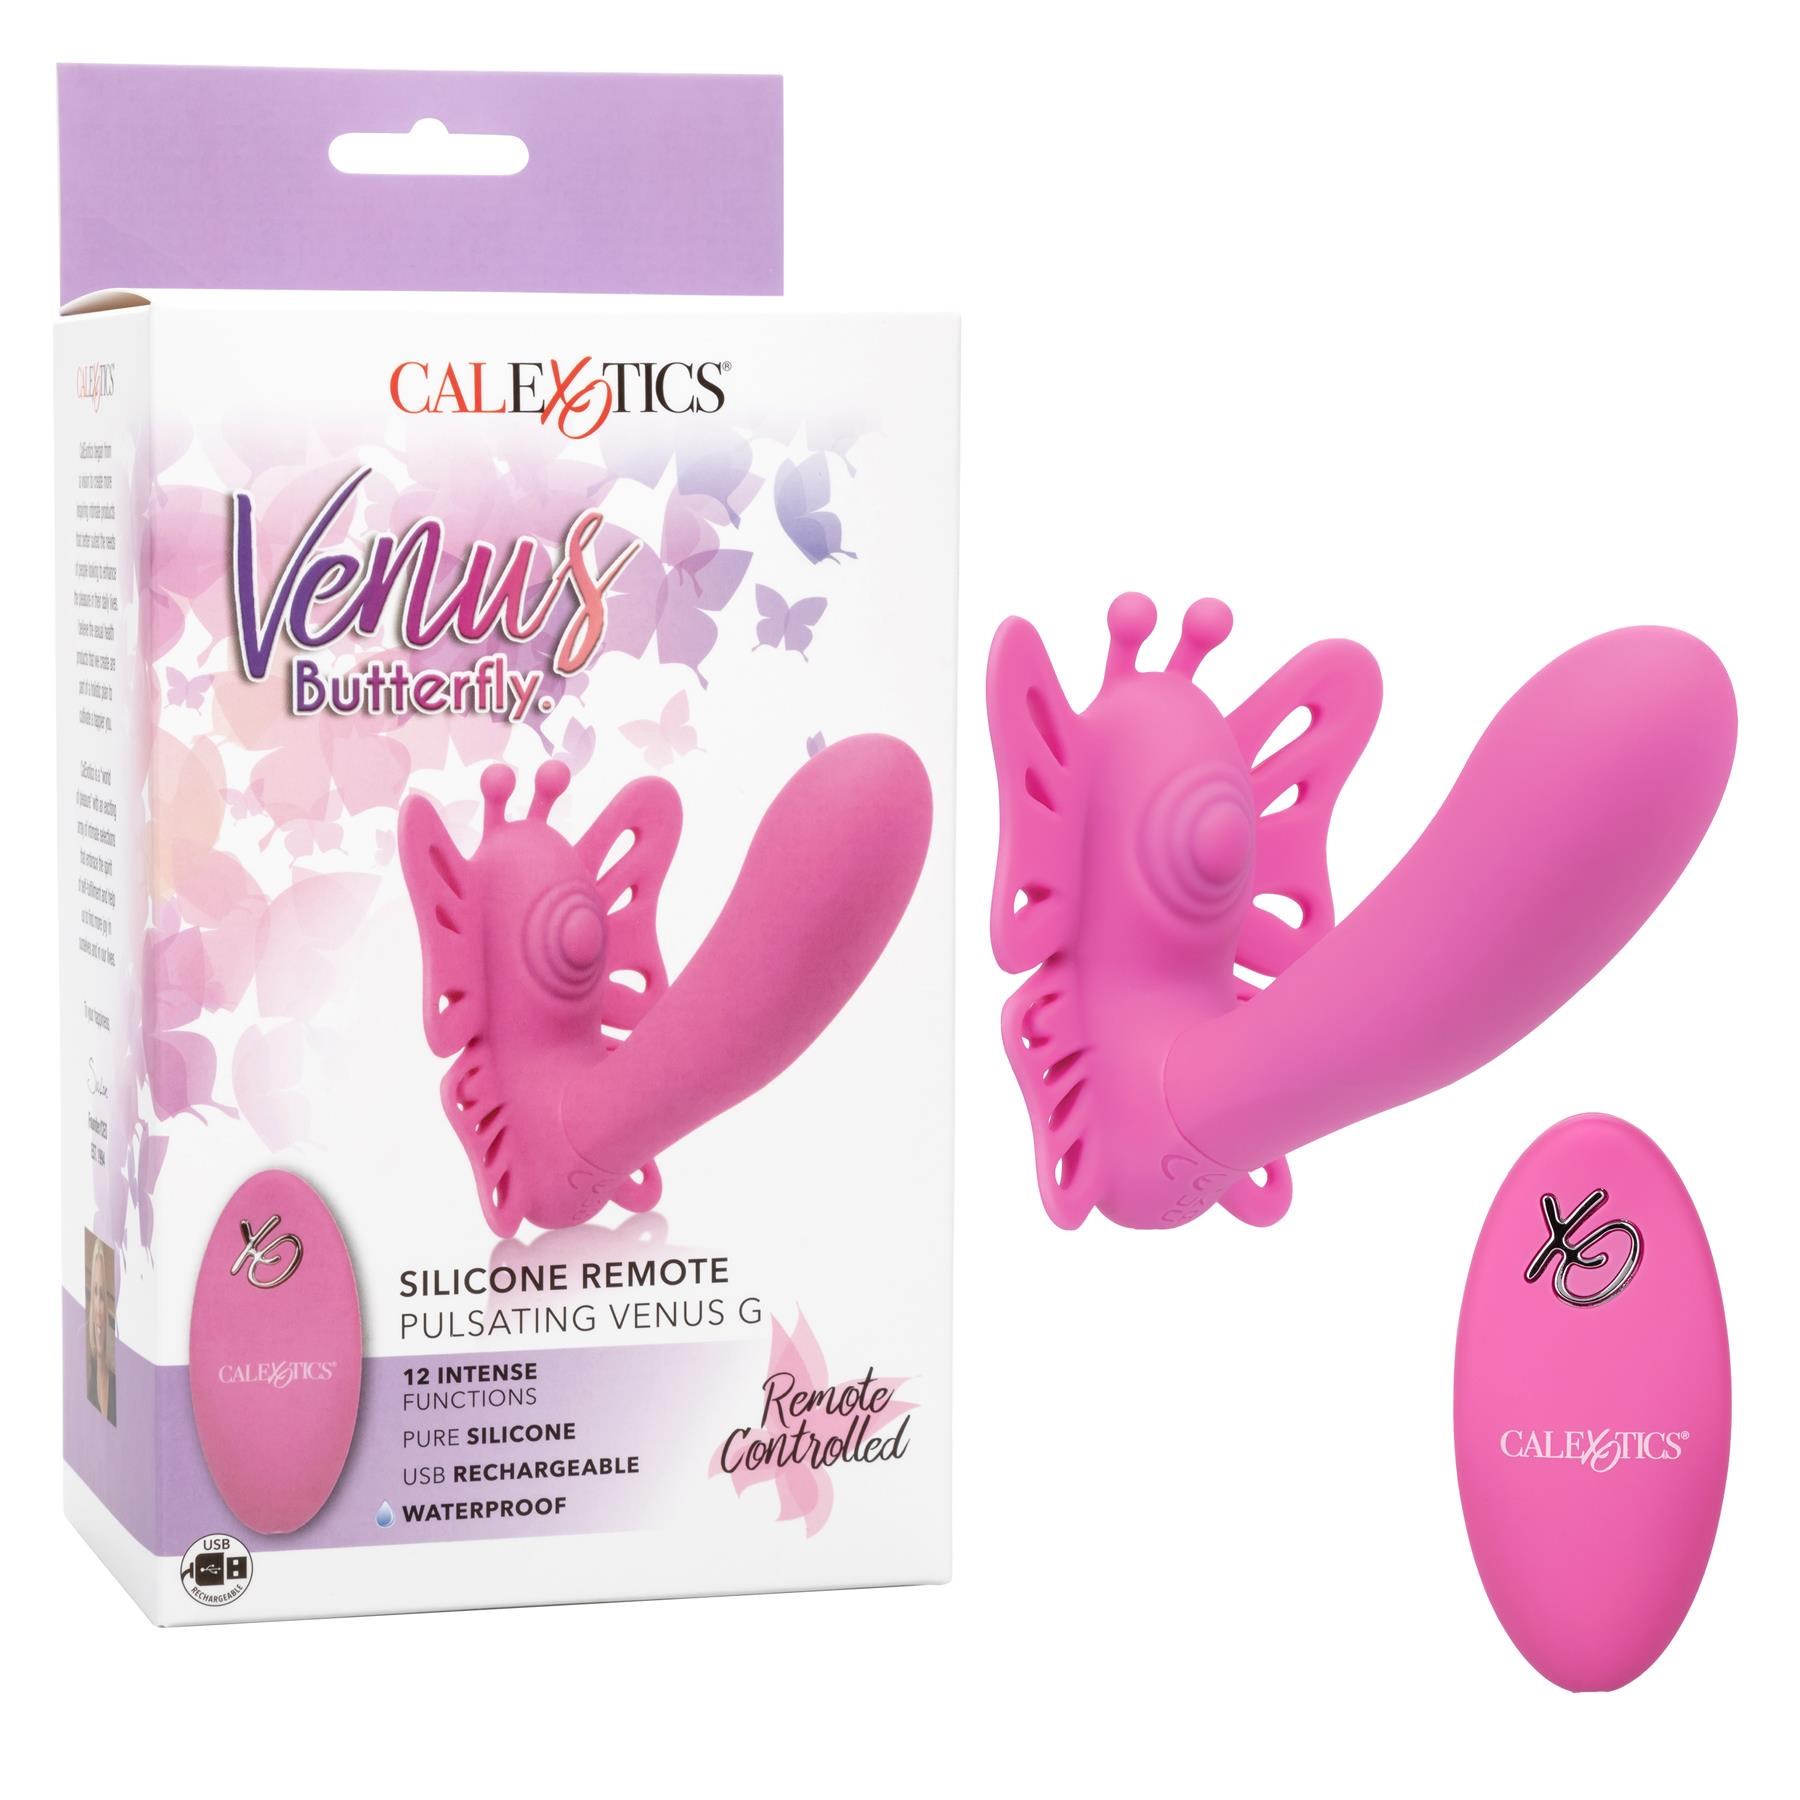 Venus Butterfly Pulsating Venus G - Product and Packaging